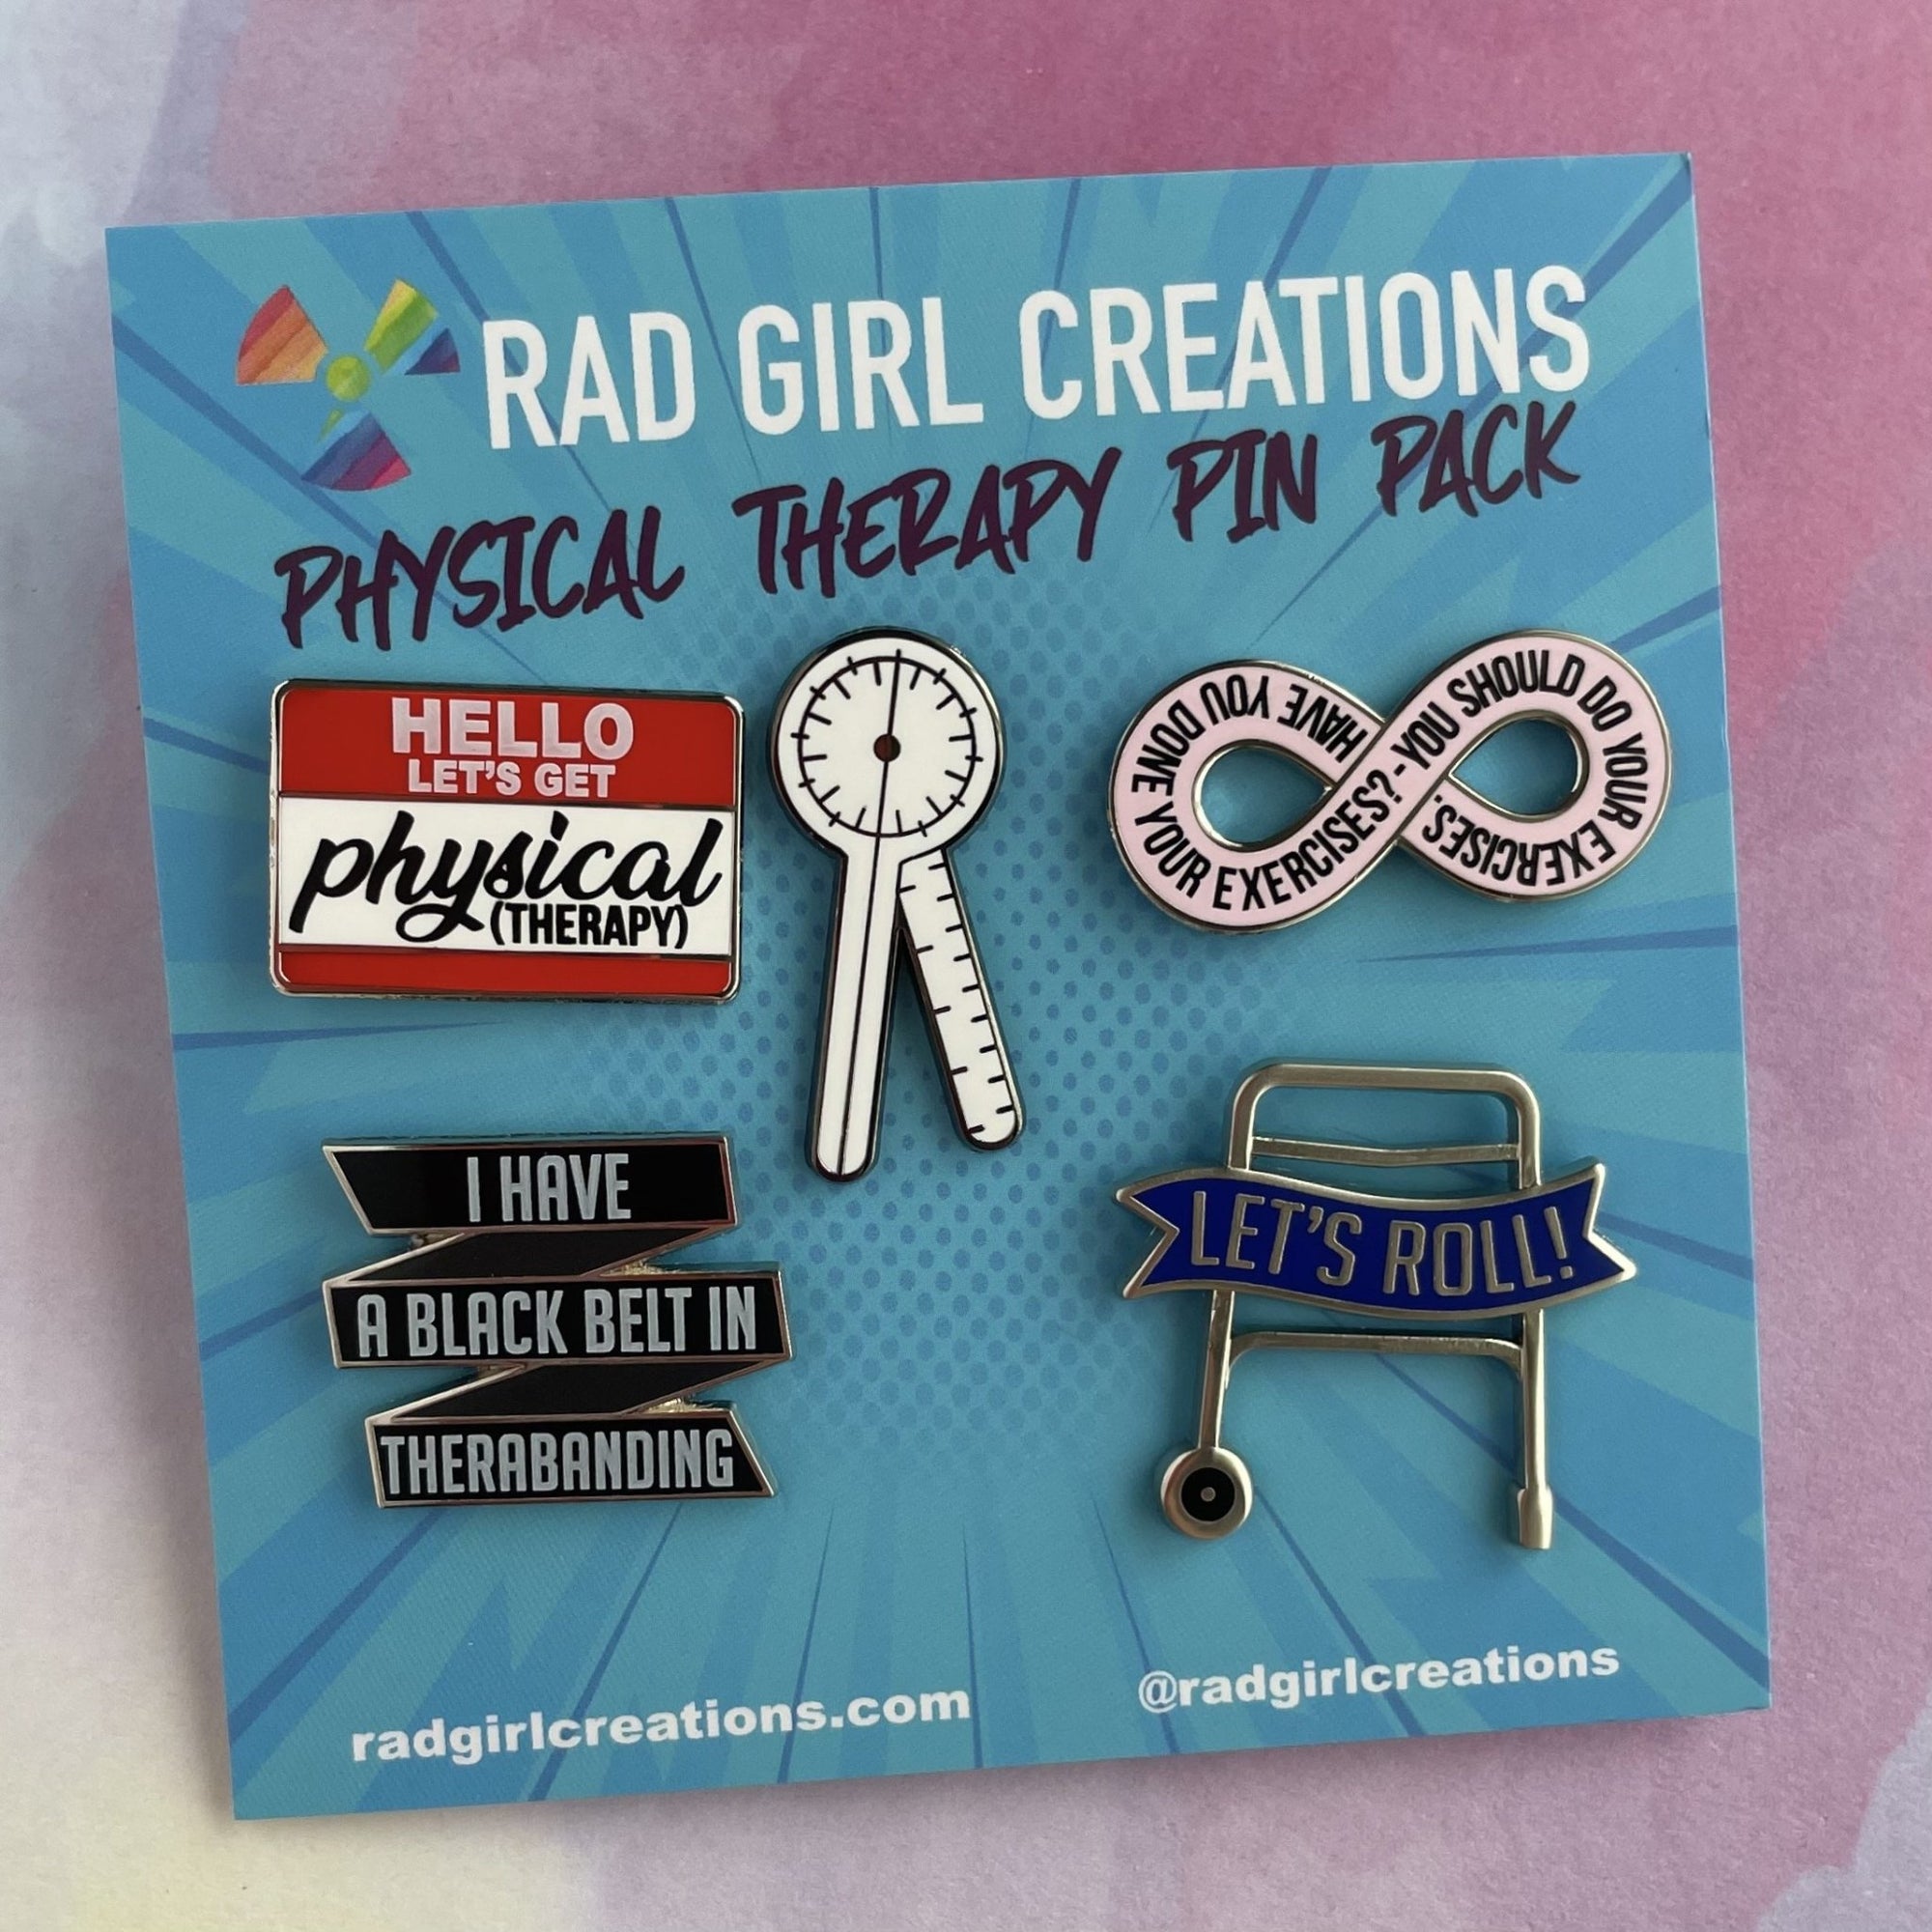 Physical Therapy Pin Pack - Rad Girl Creations